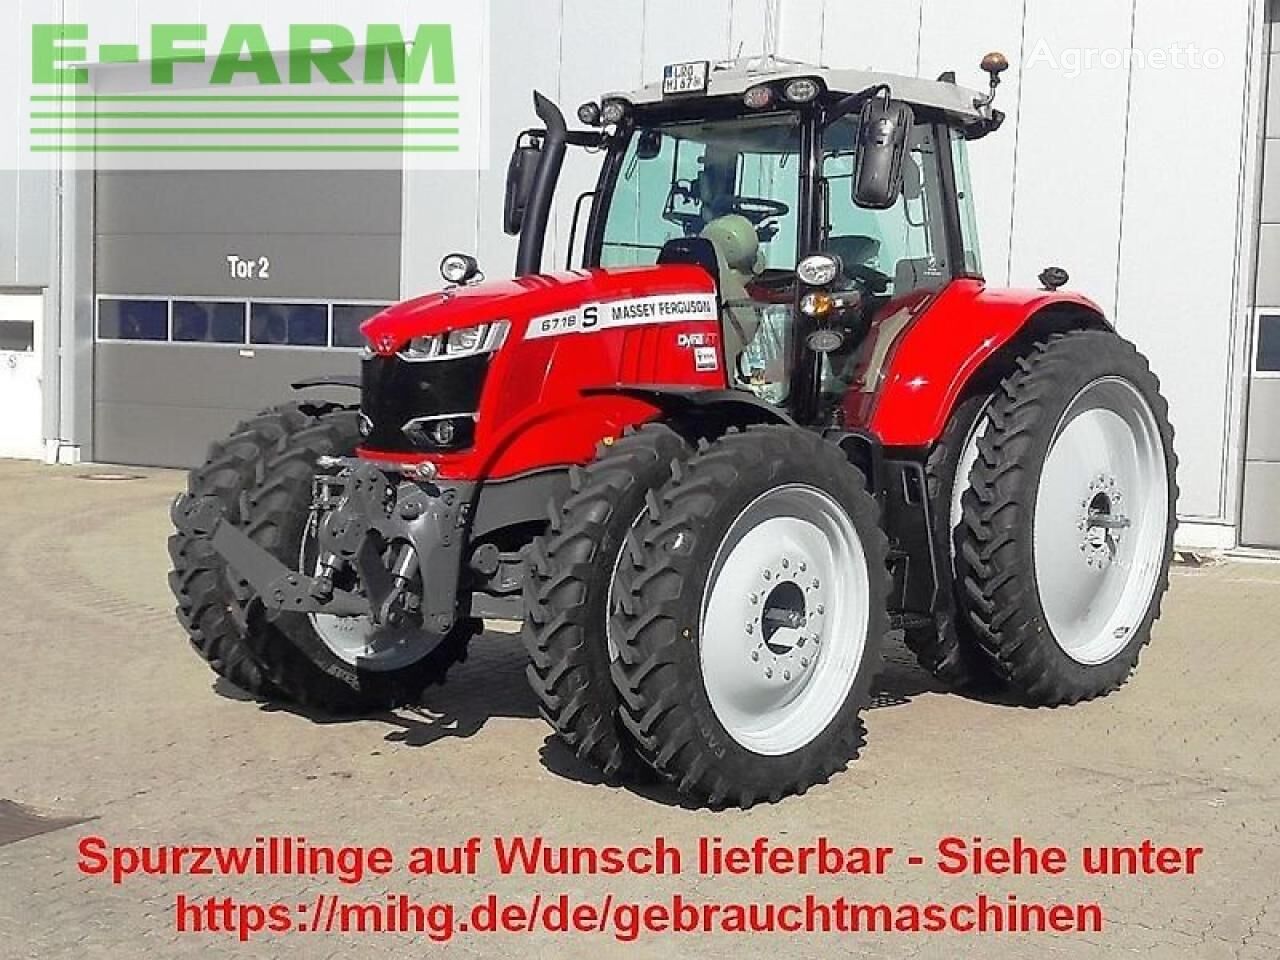 6718 dyna vt mit frontlader wheel tractor